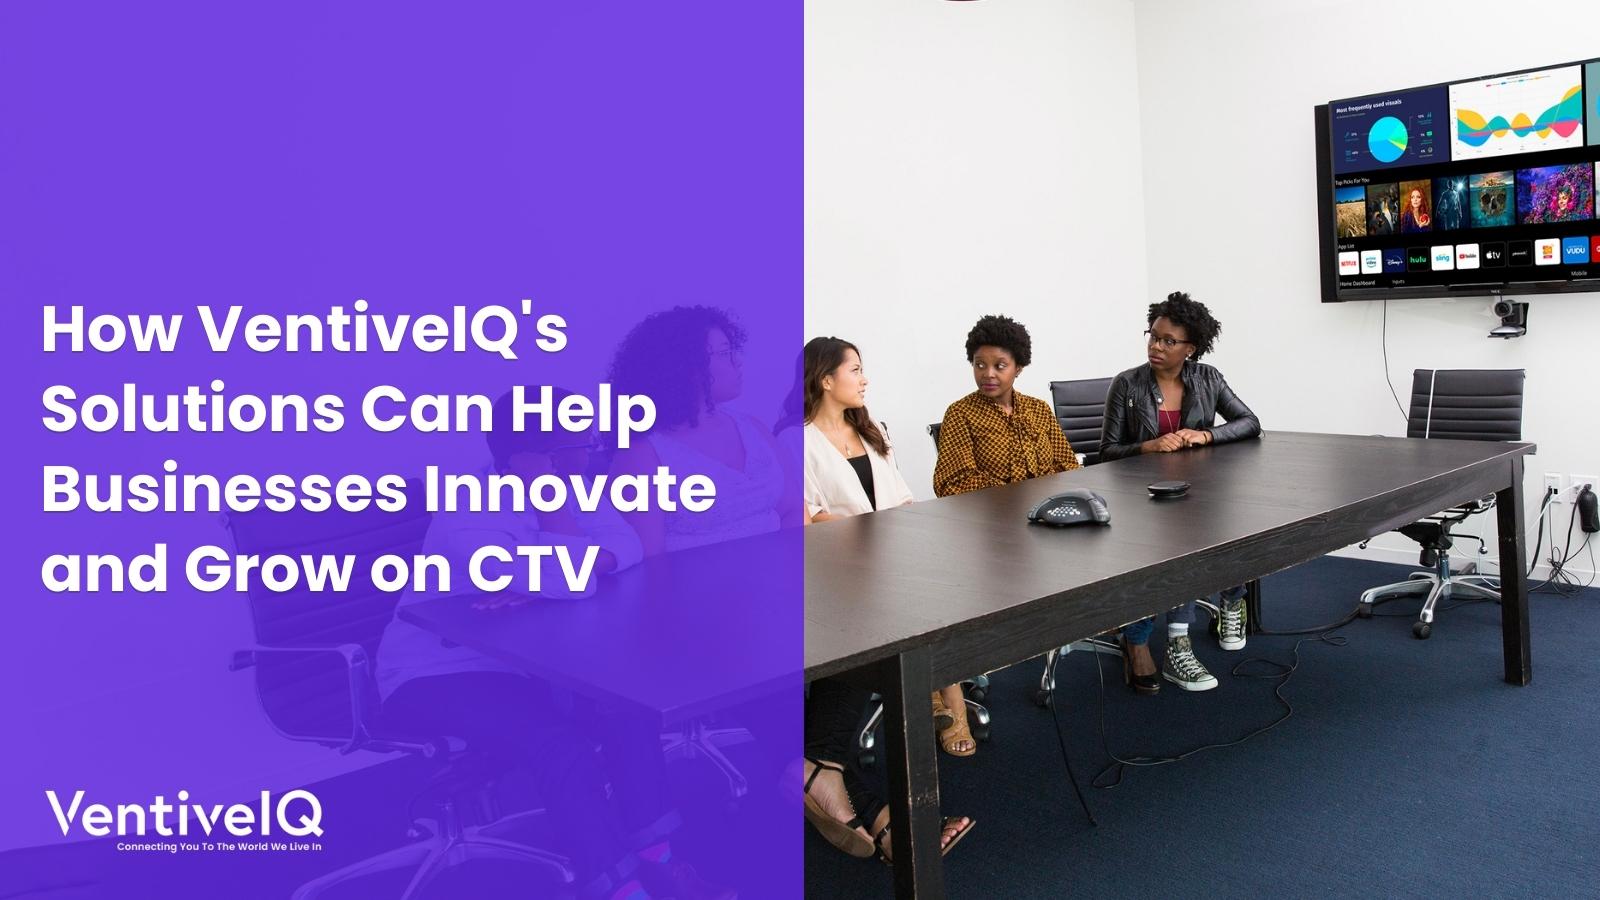 How VentiveIQ’s Solutions Can Help Businesses Innovate & Grow on CTV